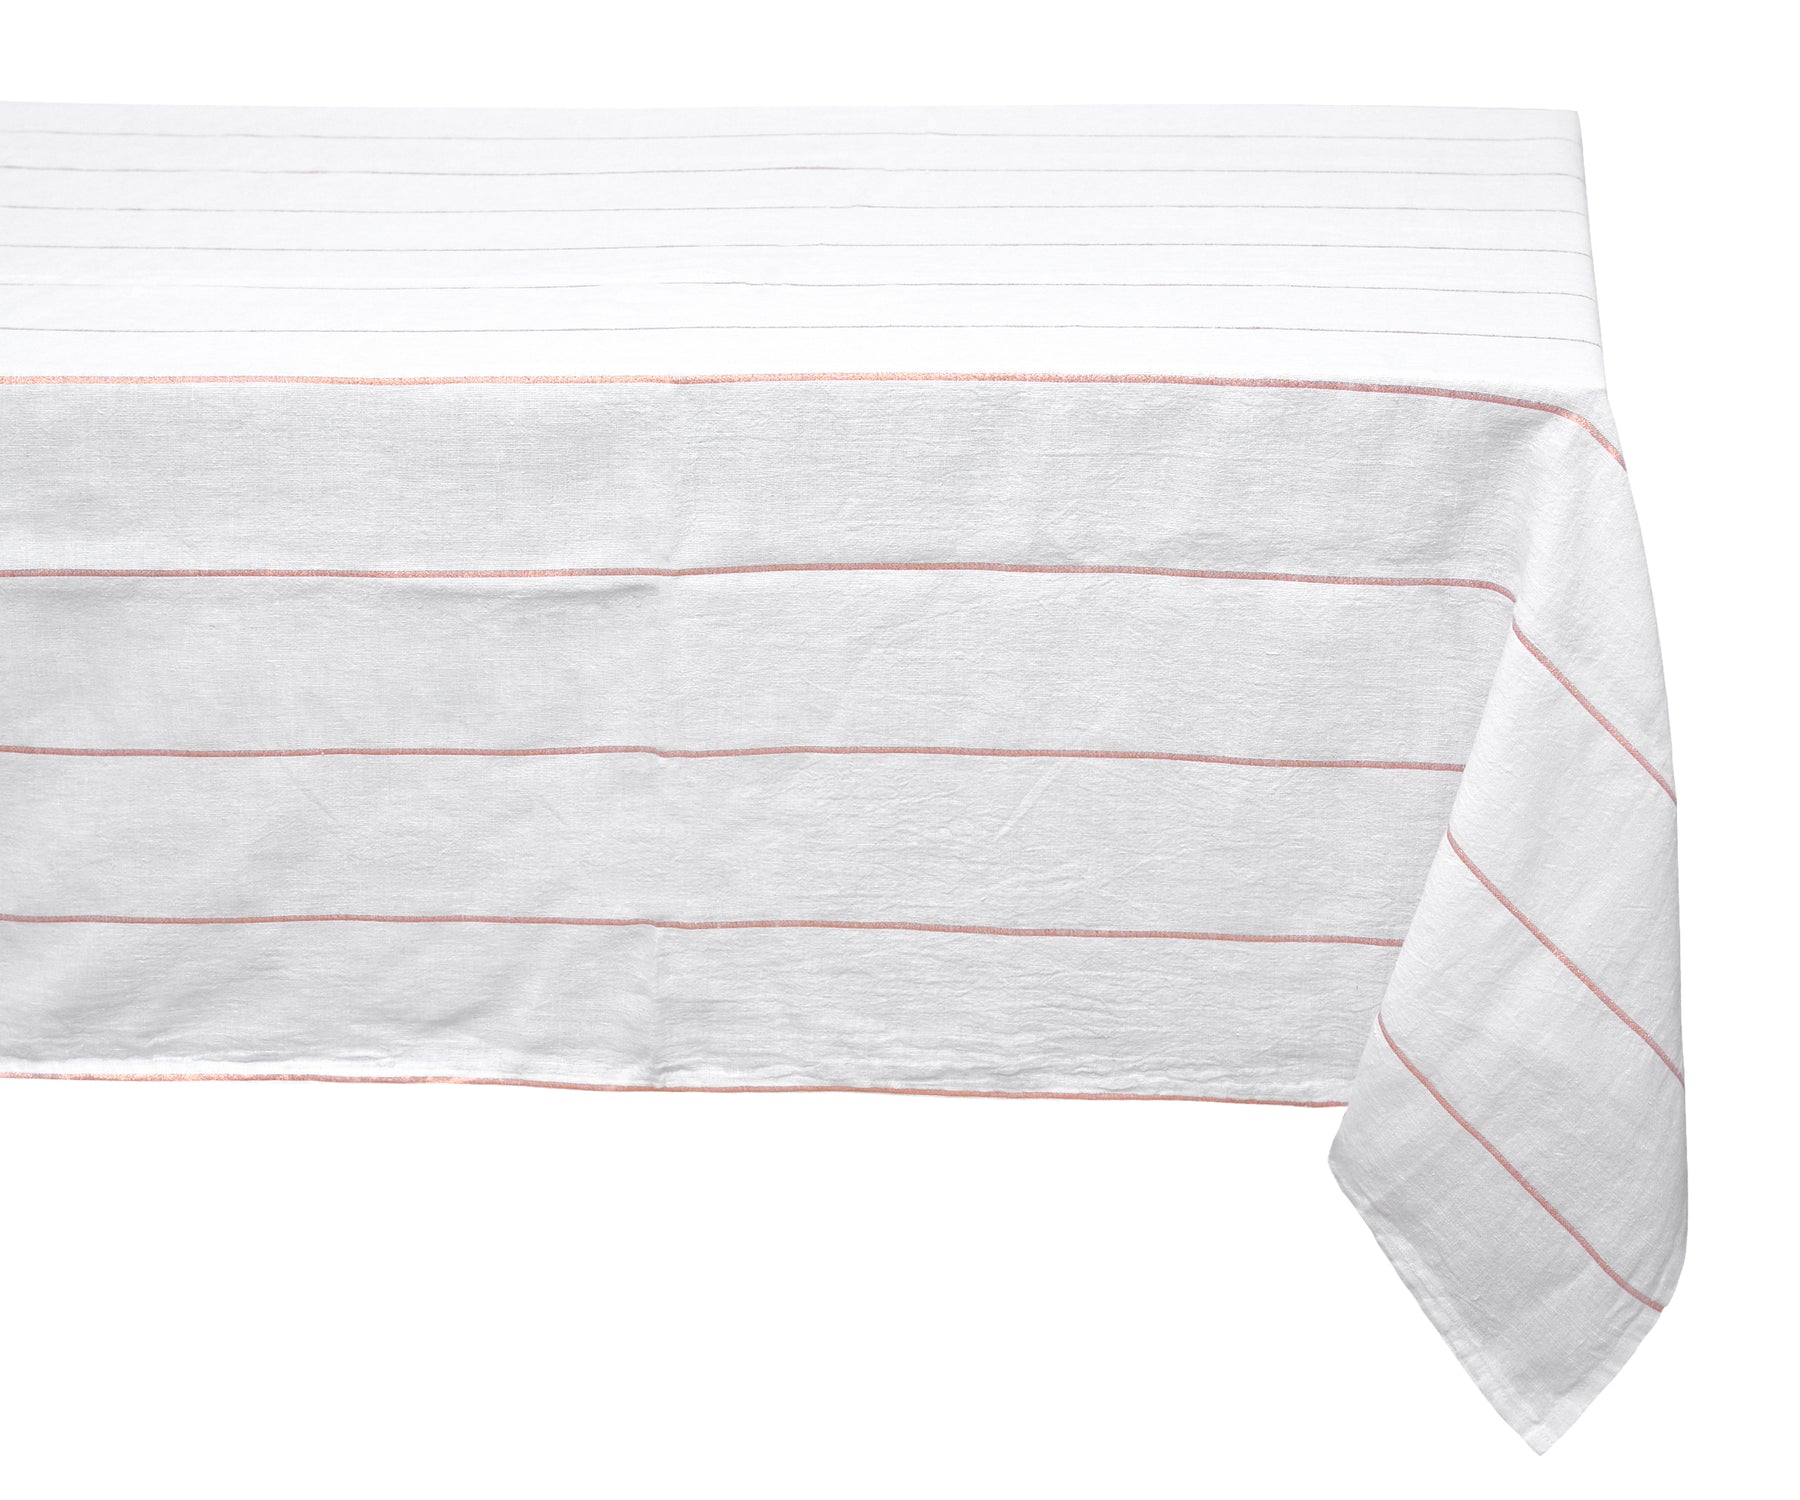 Customize your table setup with the perfect rectangle tablecloth size.